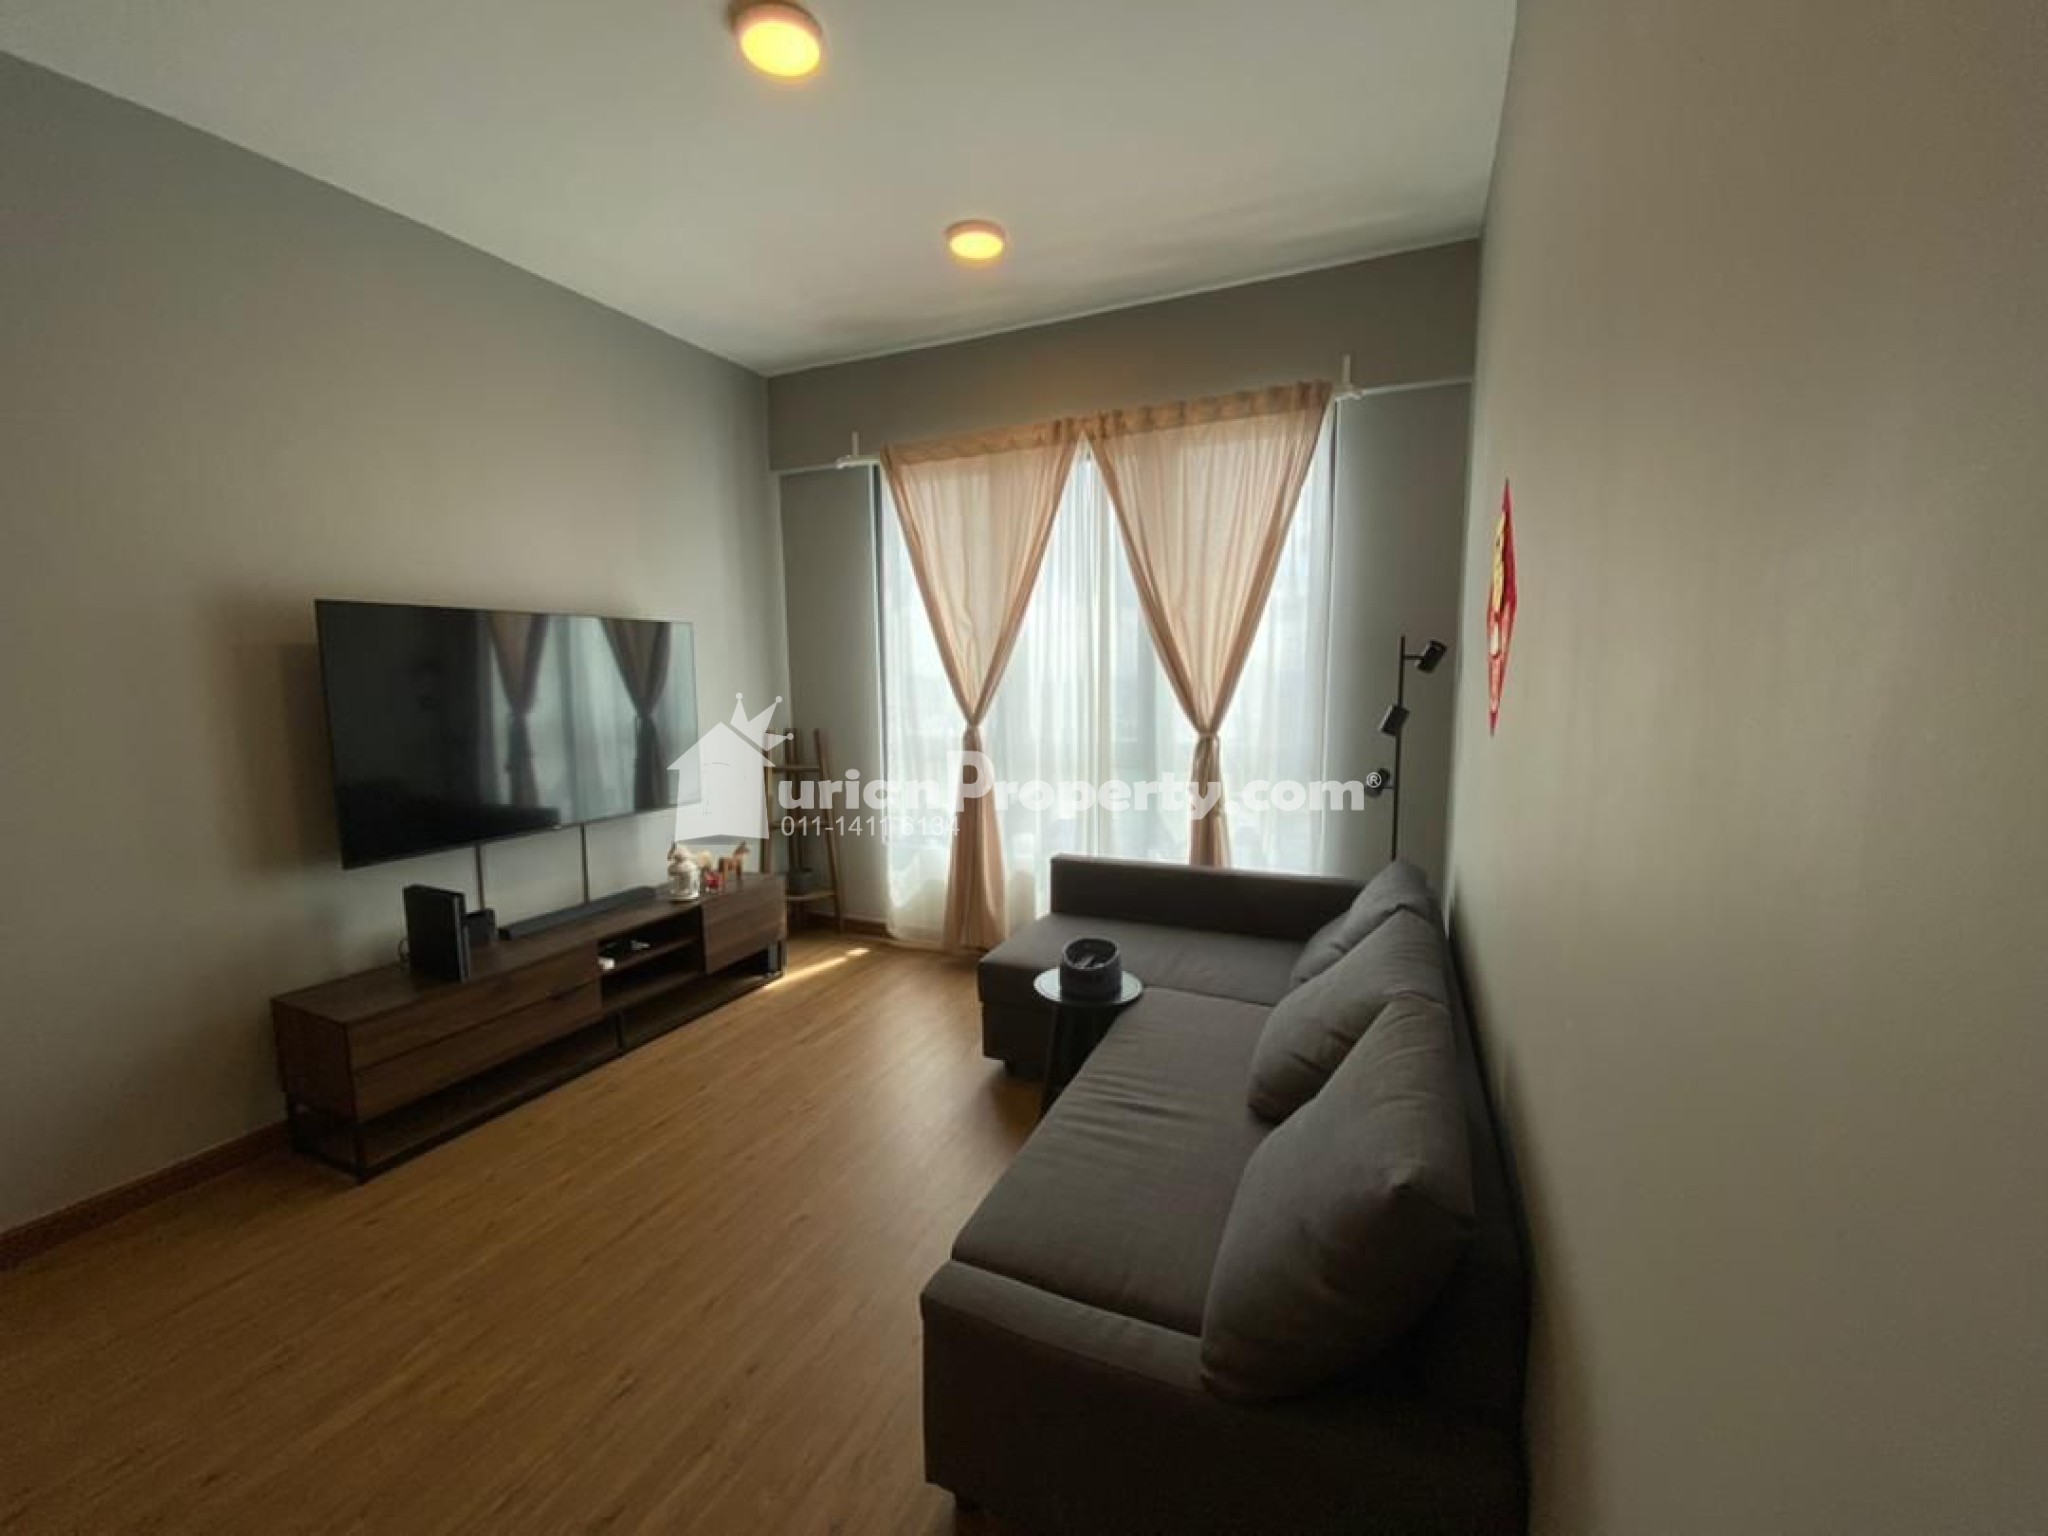 Condo For Sale at East Parc